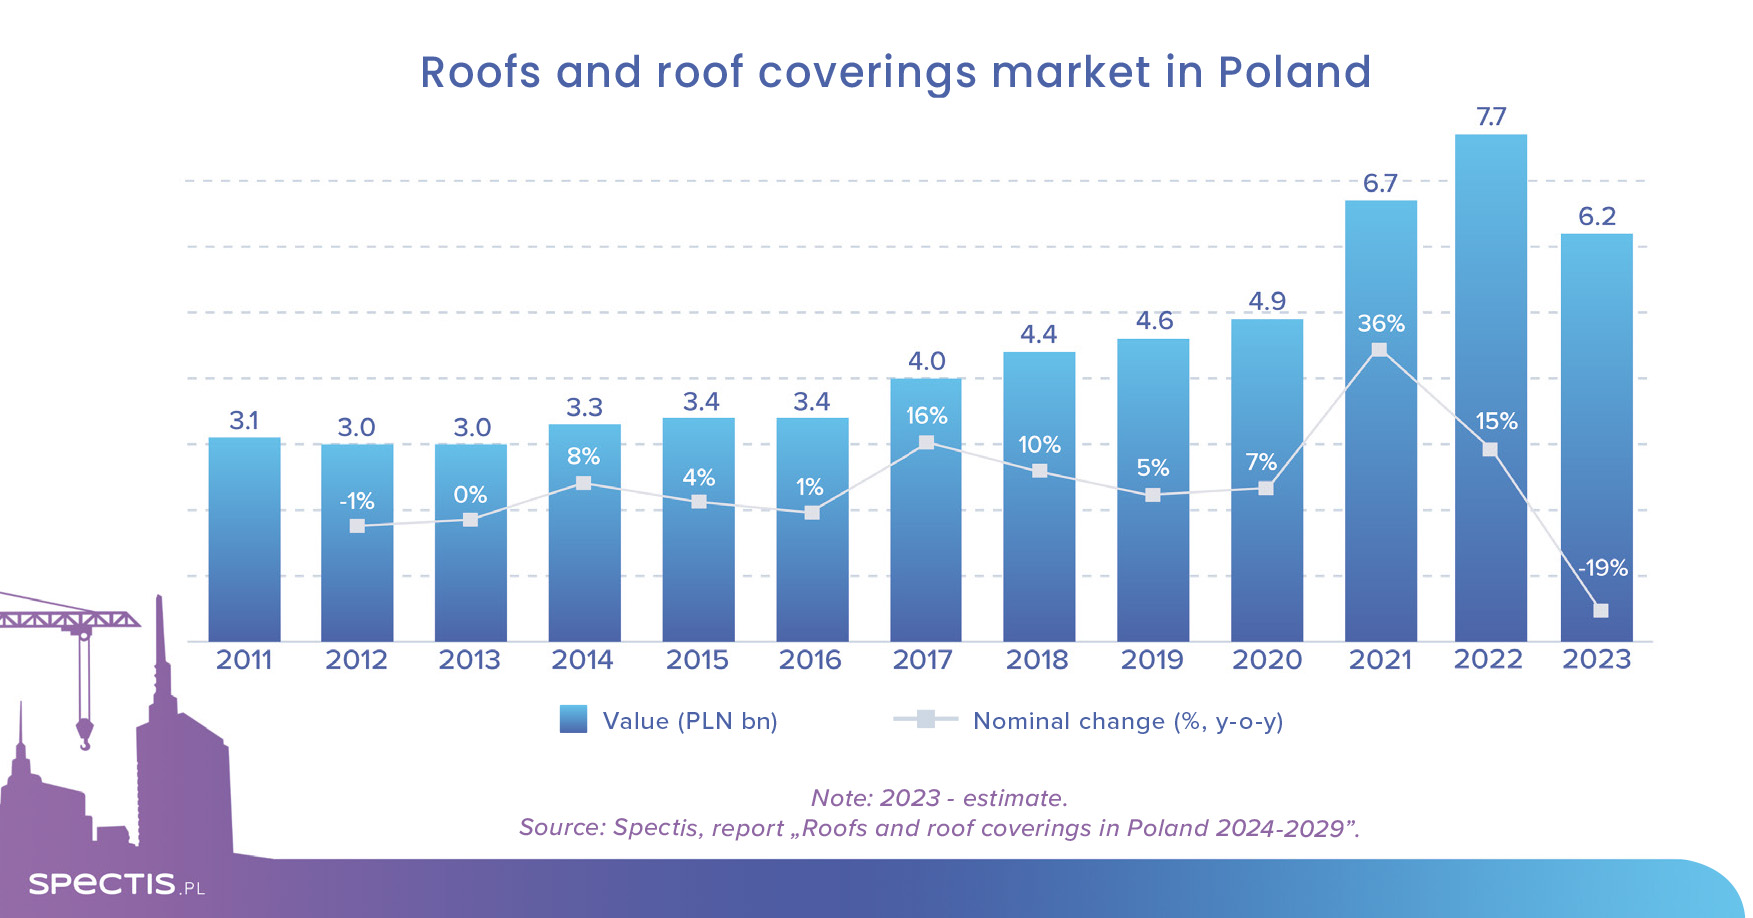 The roof coverings market in Poland topped PLN 6bn in 2023